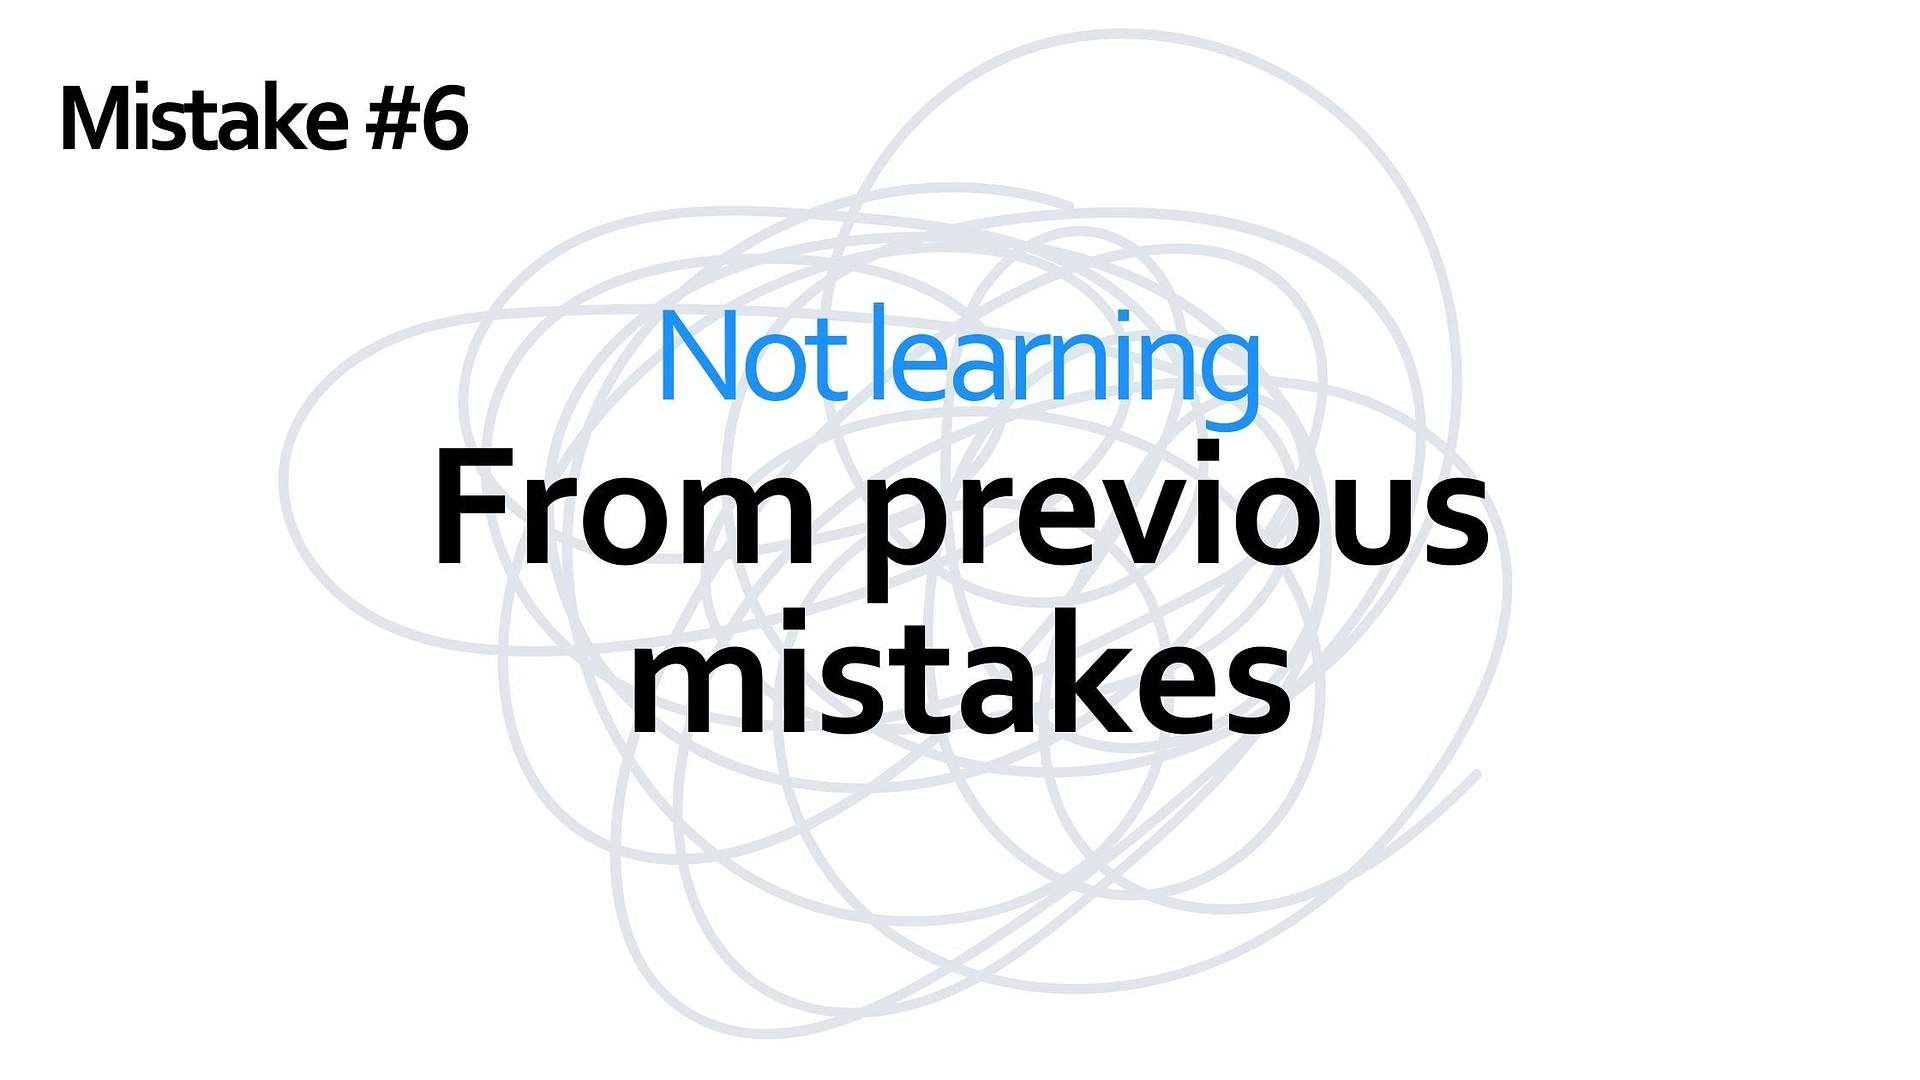 Mistake #6 - not learning from previous mistakes